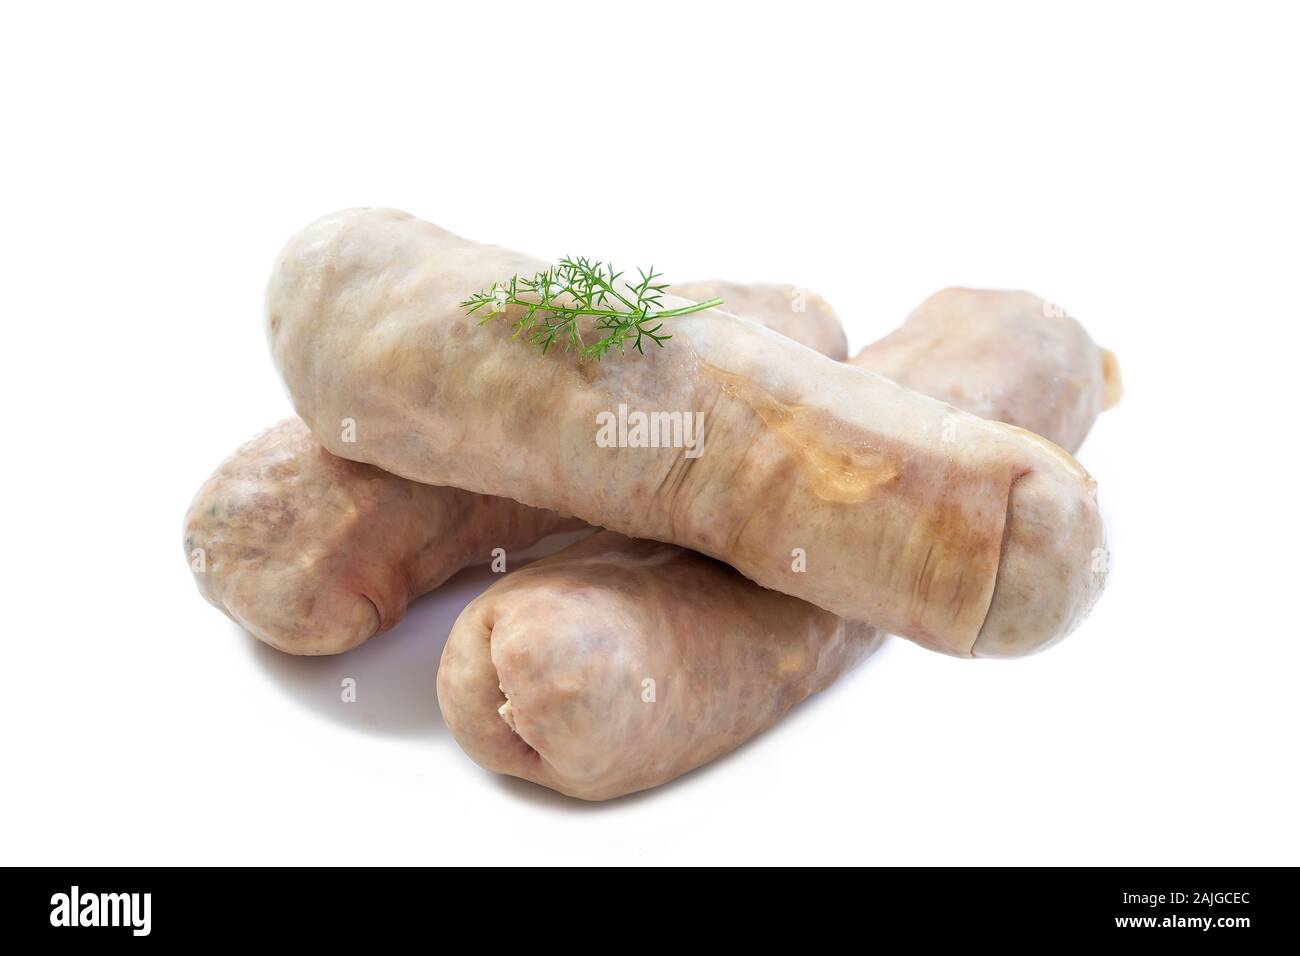 Andouillette: french typical sausage from pork intestine on a white background. Stock Photo